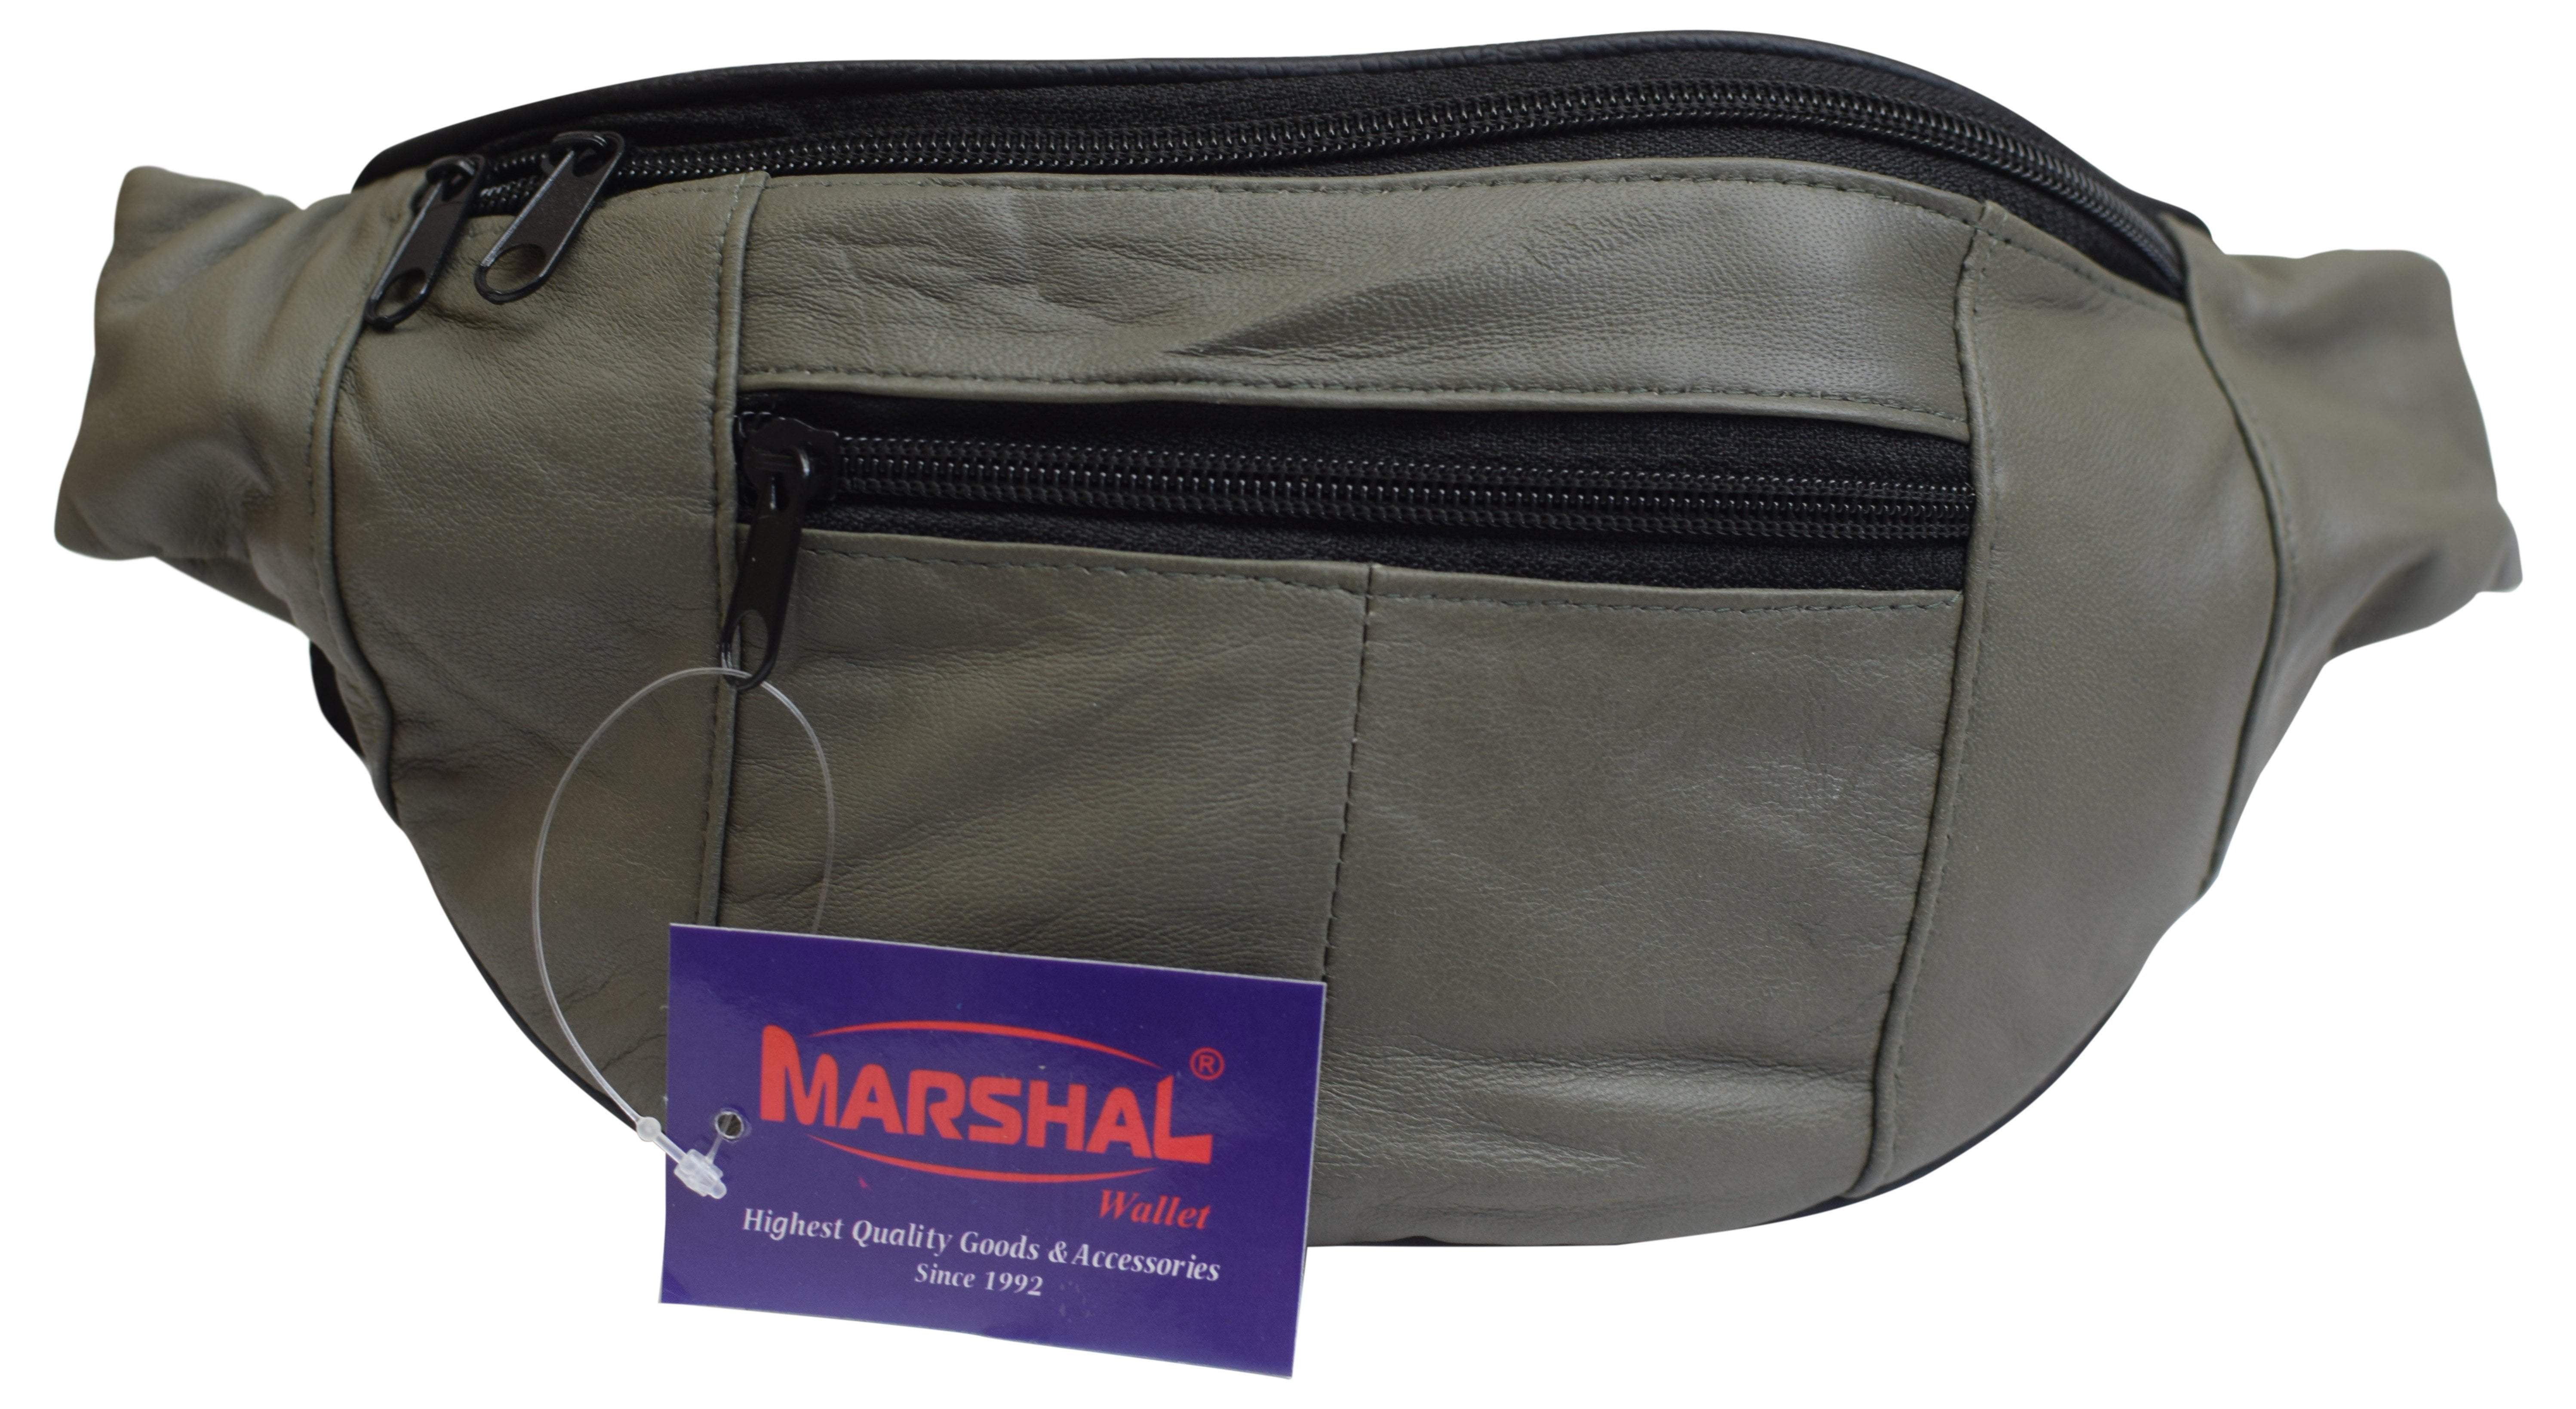 Marshal - Mens Womens Genuine Leather Fanny Pack Pouch Waist Bag Slim Design Hiking Camping ...